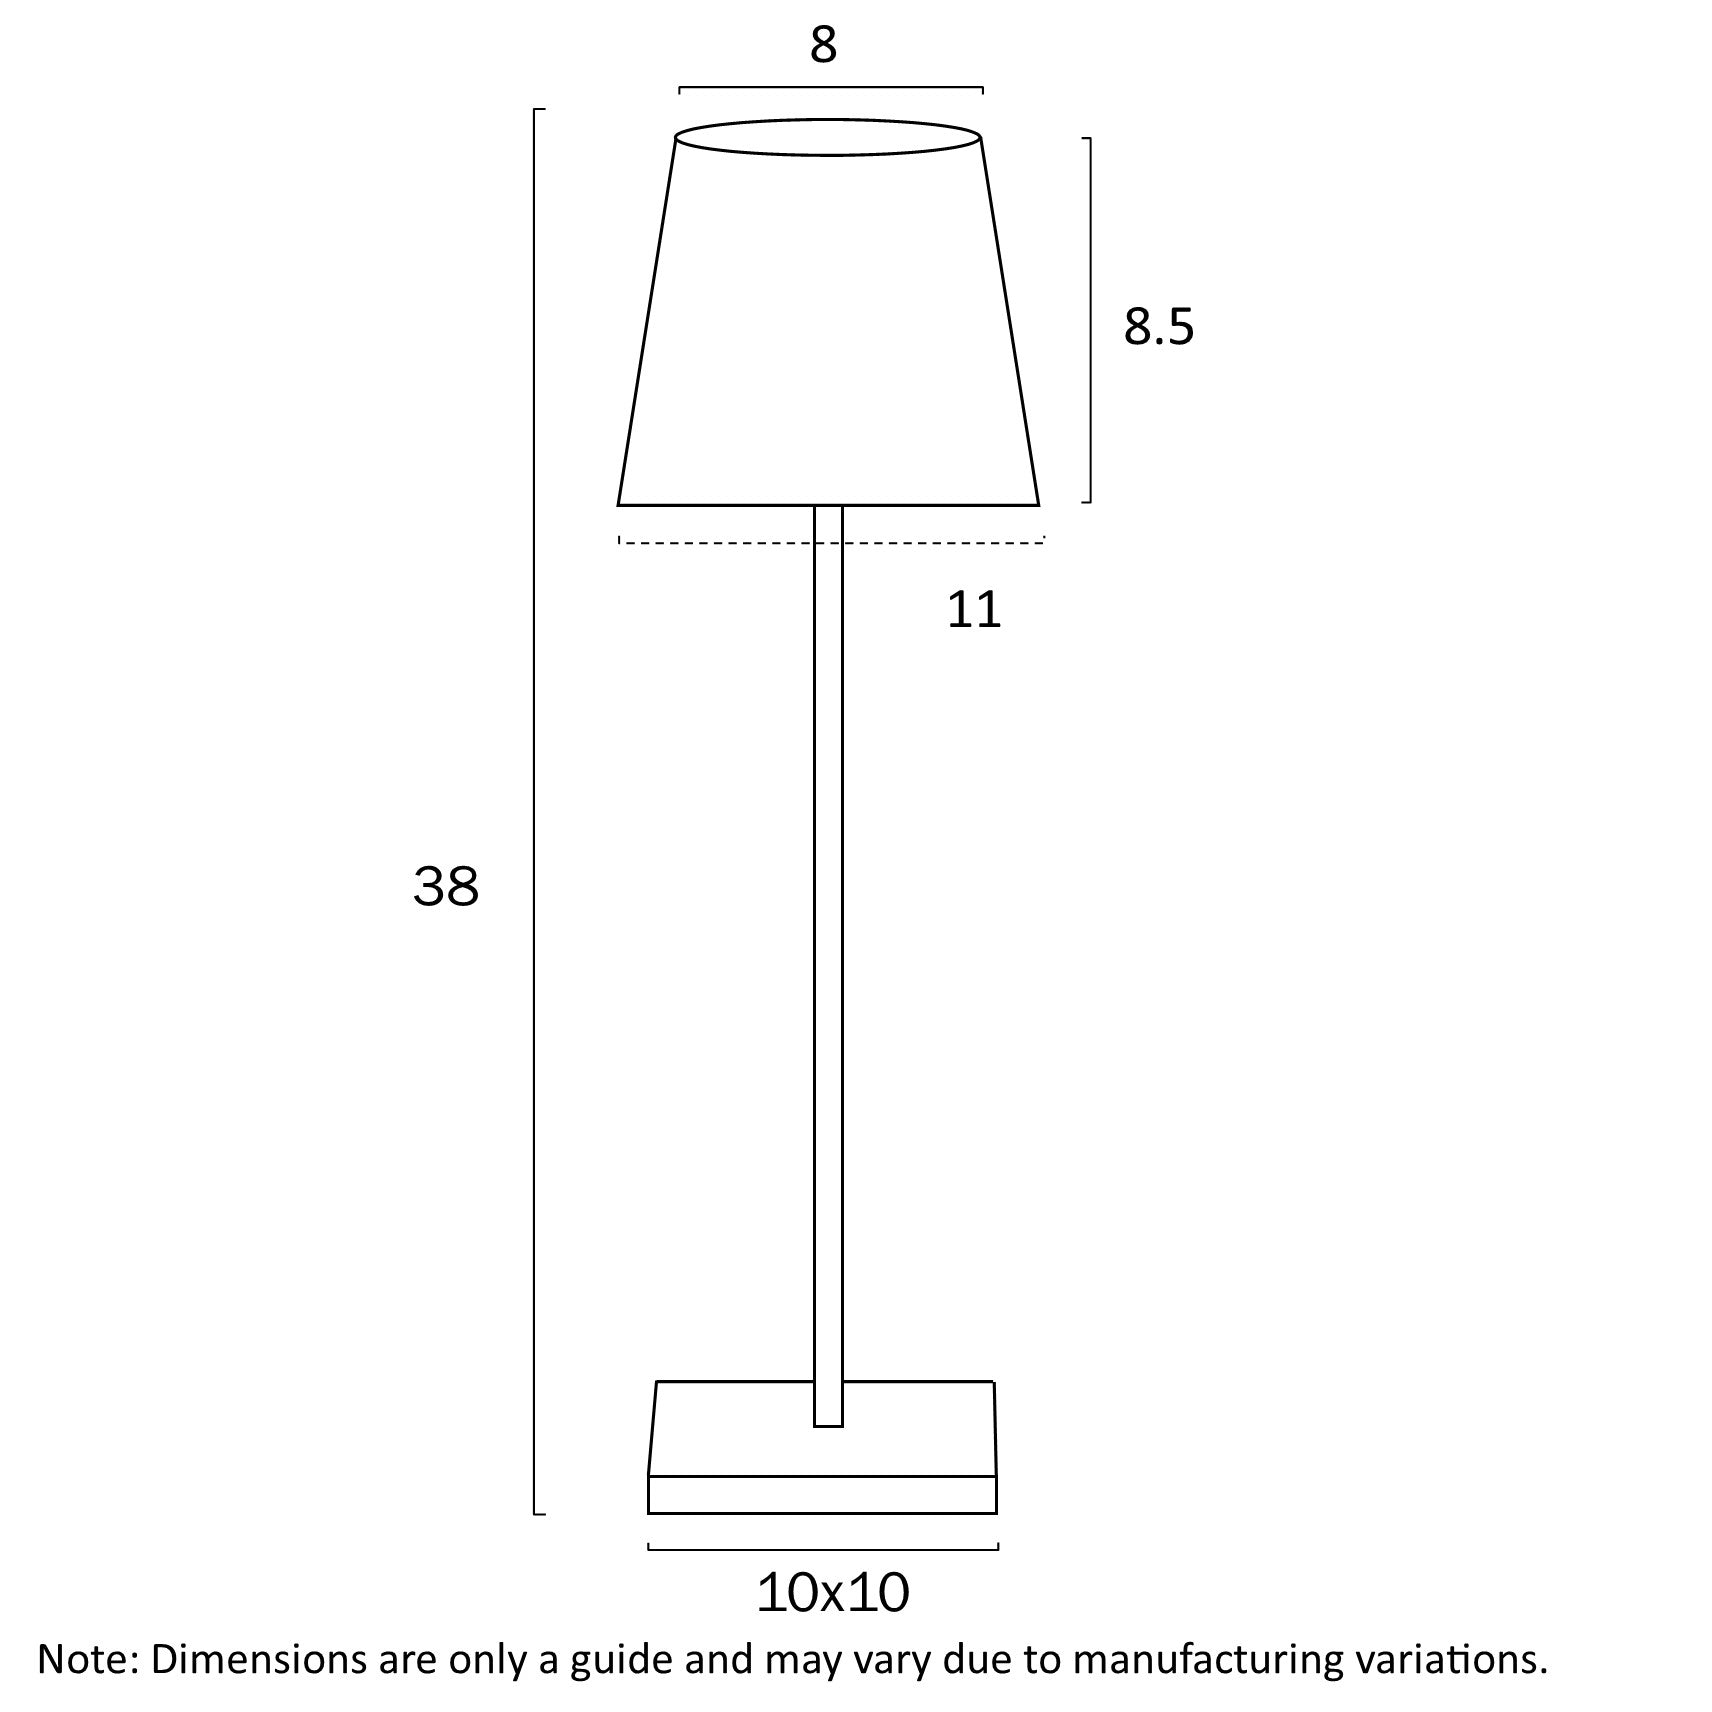 Clio Rechargeable Table Lamp